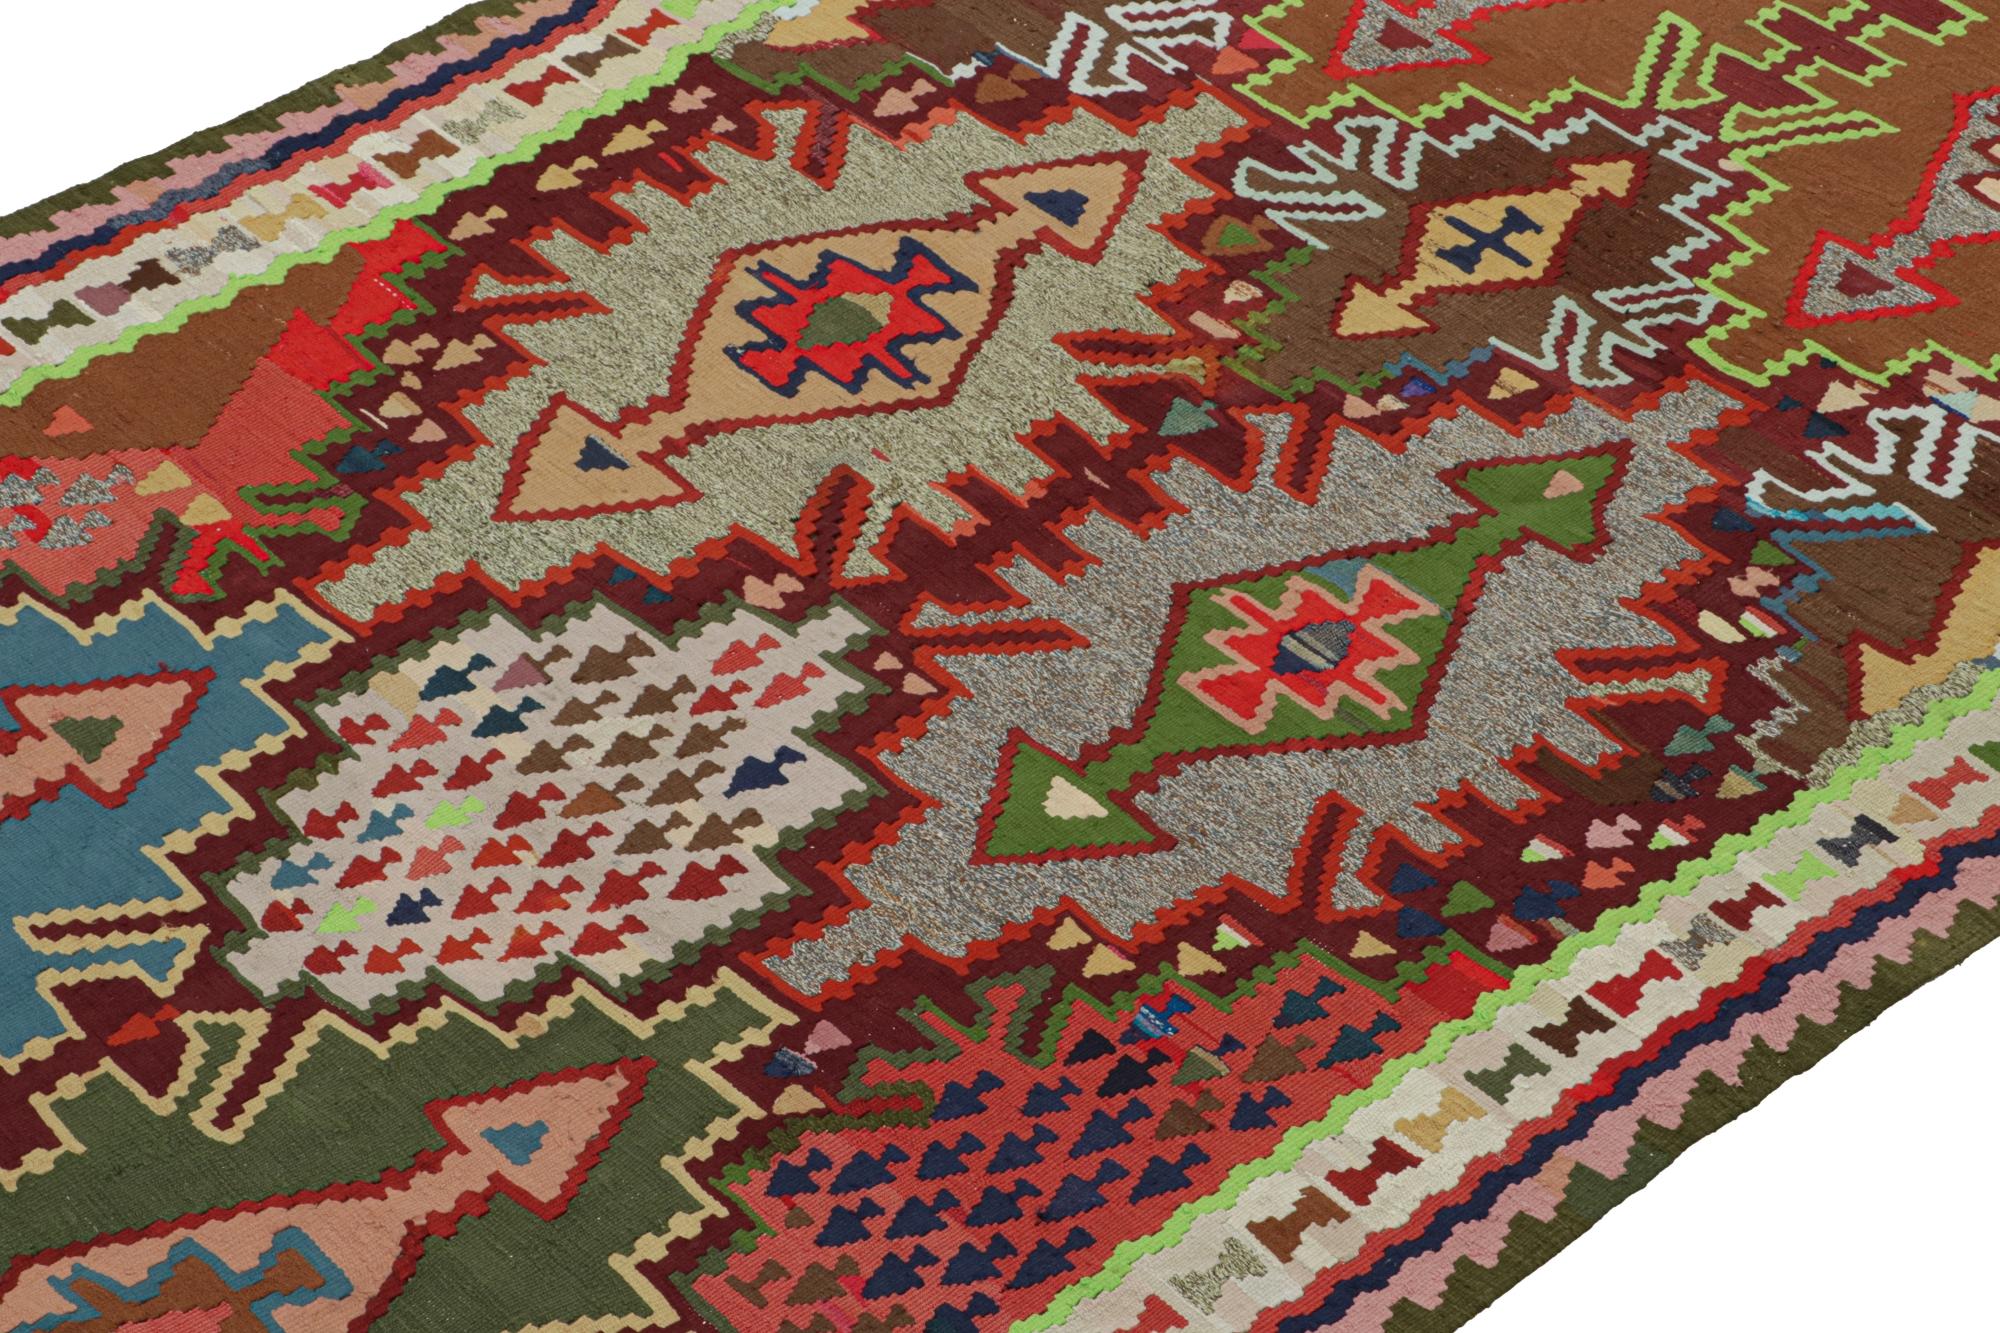 This vintage 5x10 Persian Kilim is a tribal rug from Meshkin—a small northwestern village known for its fabulous works. Handwoven in wool, it originates circa 1950-1960.

On the Design:

The bold design prefers tribal geometric patterns in